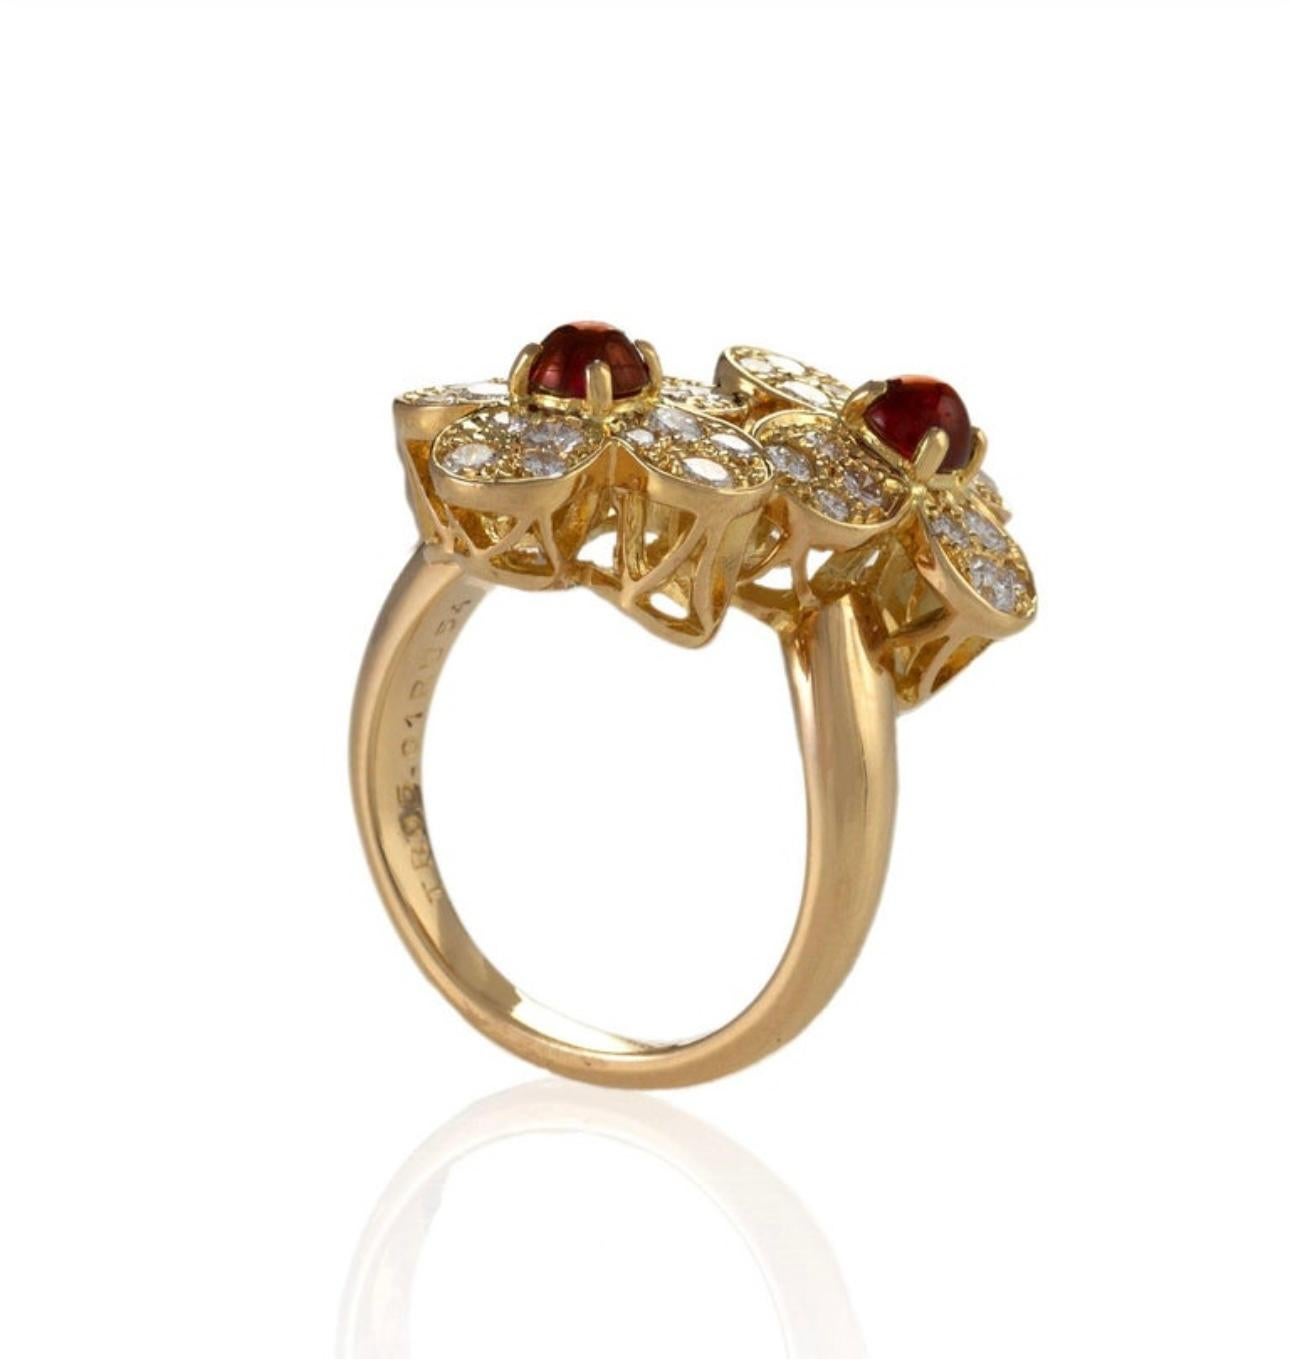 Van Cleef & Arpels Contemporary Ruby and Diamond “Trefle” Ring, 18KY Gold Size 6 For Sale 3